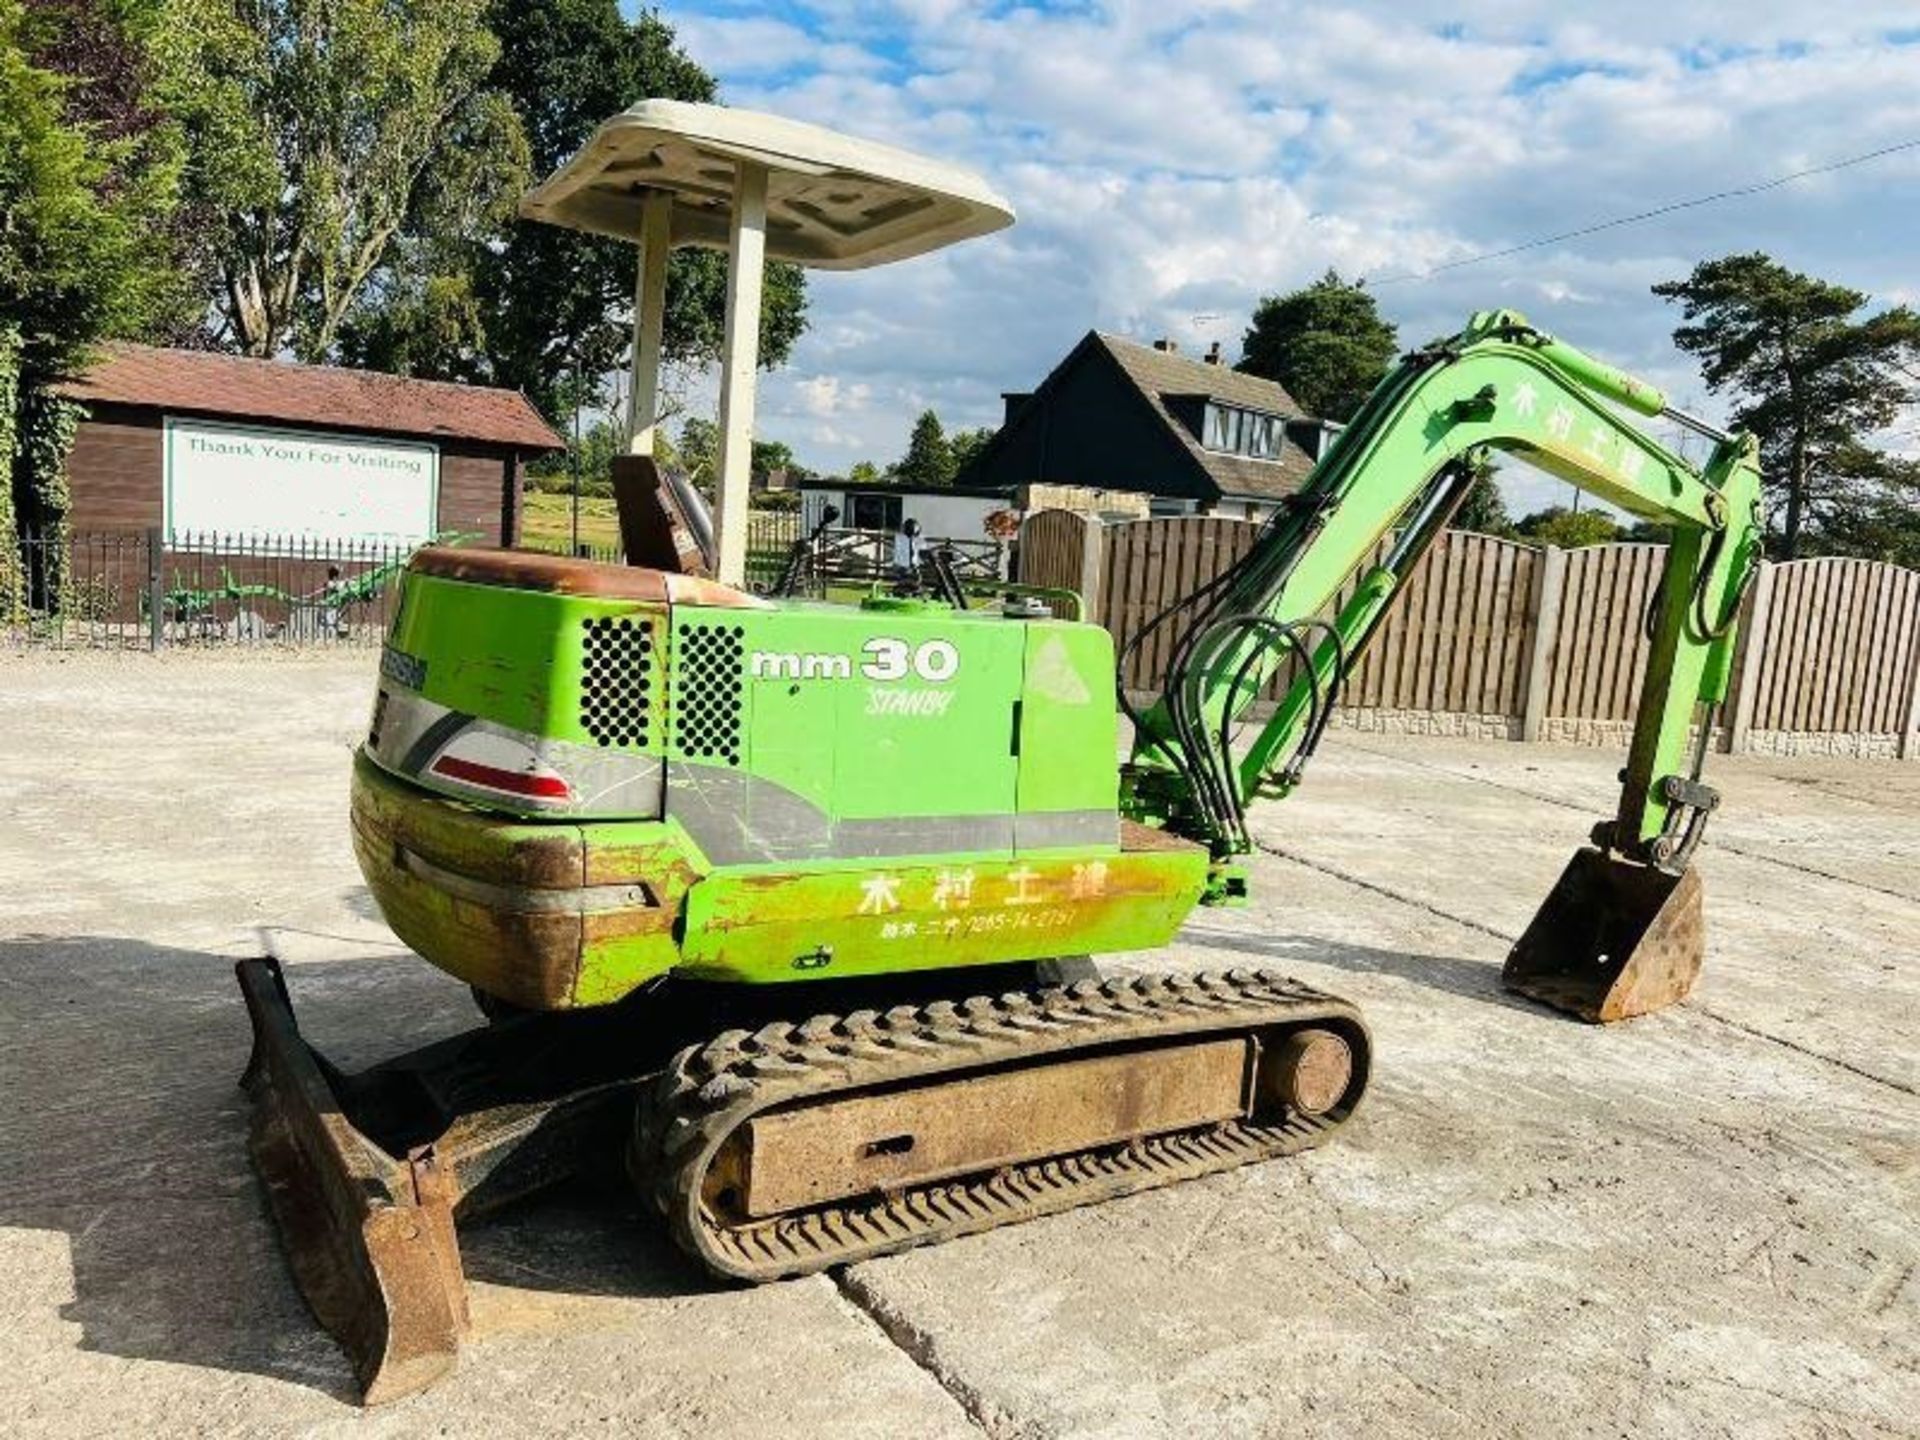 MITSUBISHI 30 TRACKED EXCAVATOR C/W RUBBER TRACKS , ROLE BAR AND CANOPY - Image 12 of 12